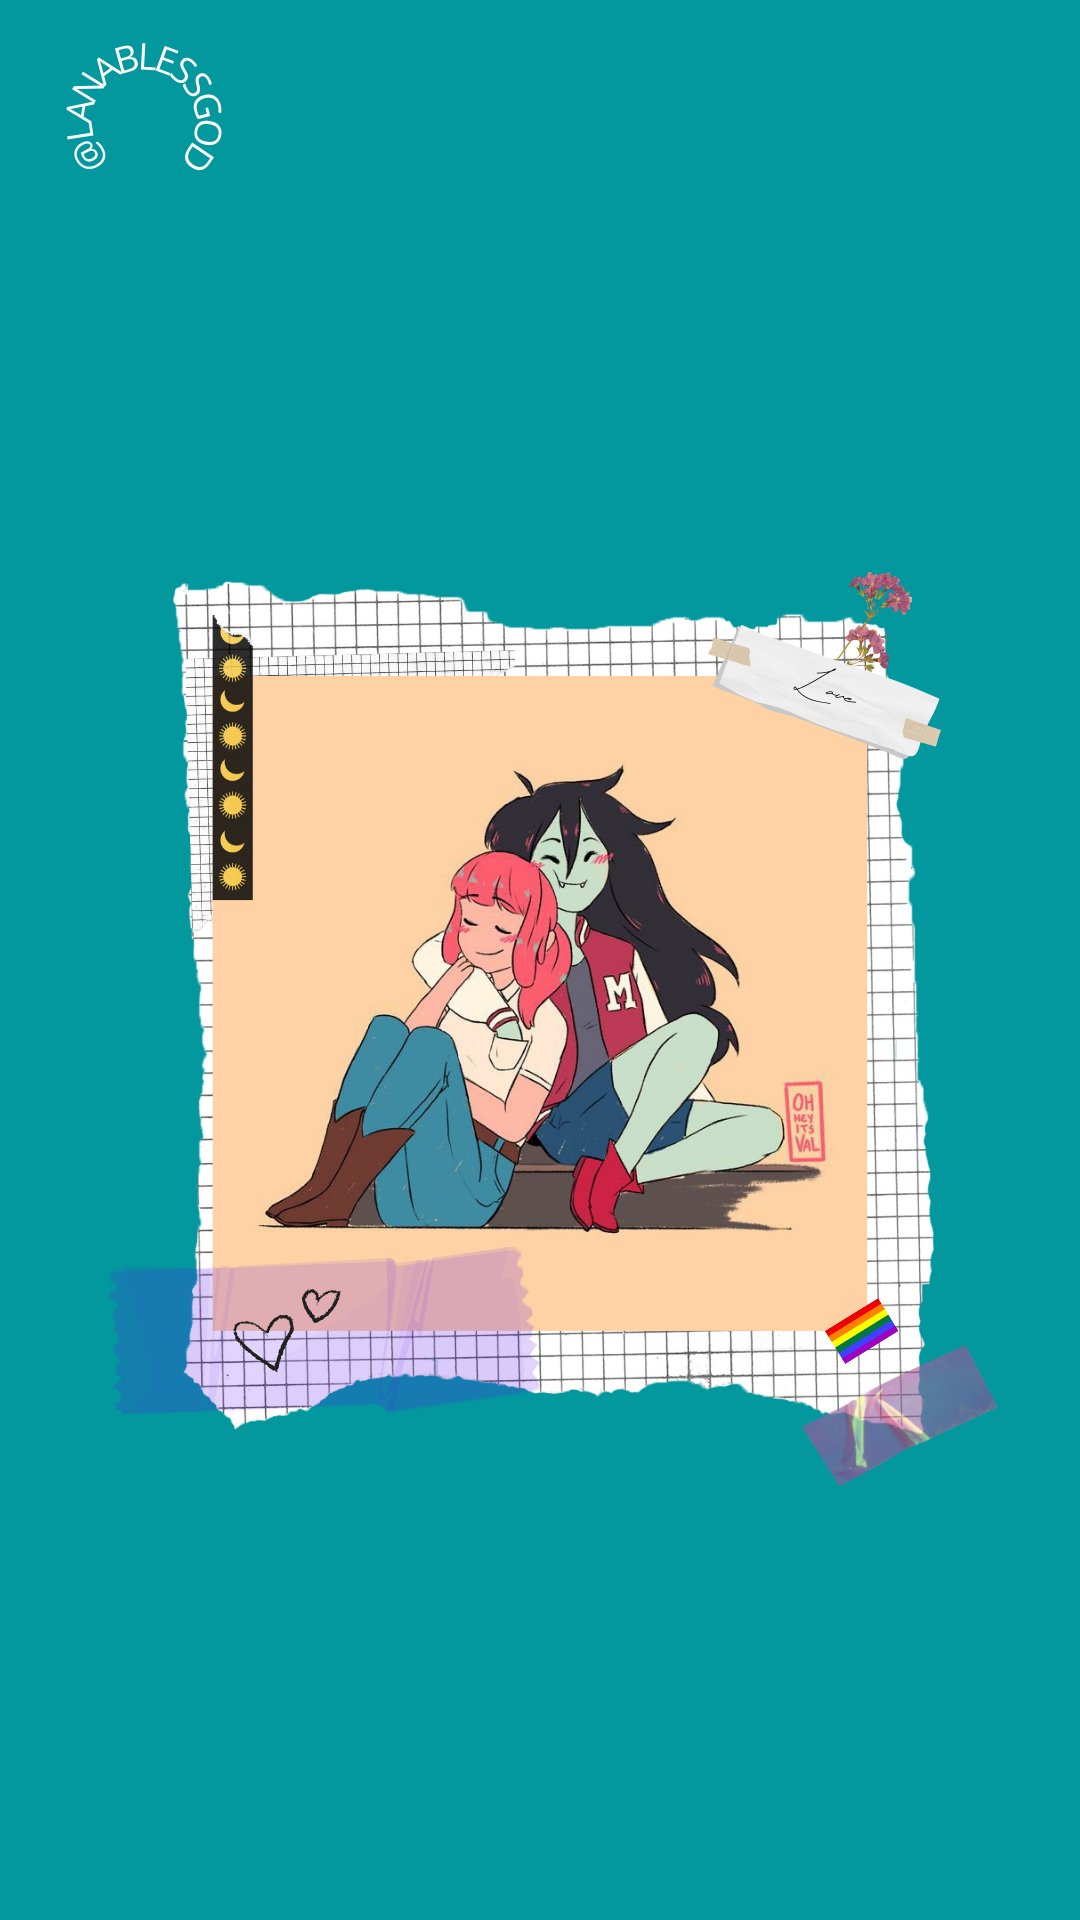 𝐡𝐚𝐥𝐜𝐲𝐨𝐧 on Twitter clivenzu so i made a wallpaper out of this  gorgeous bubbline art hope you dont mind httpstcoIFa6KuW8fB   Twitter